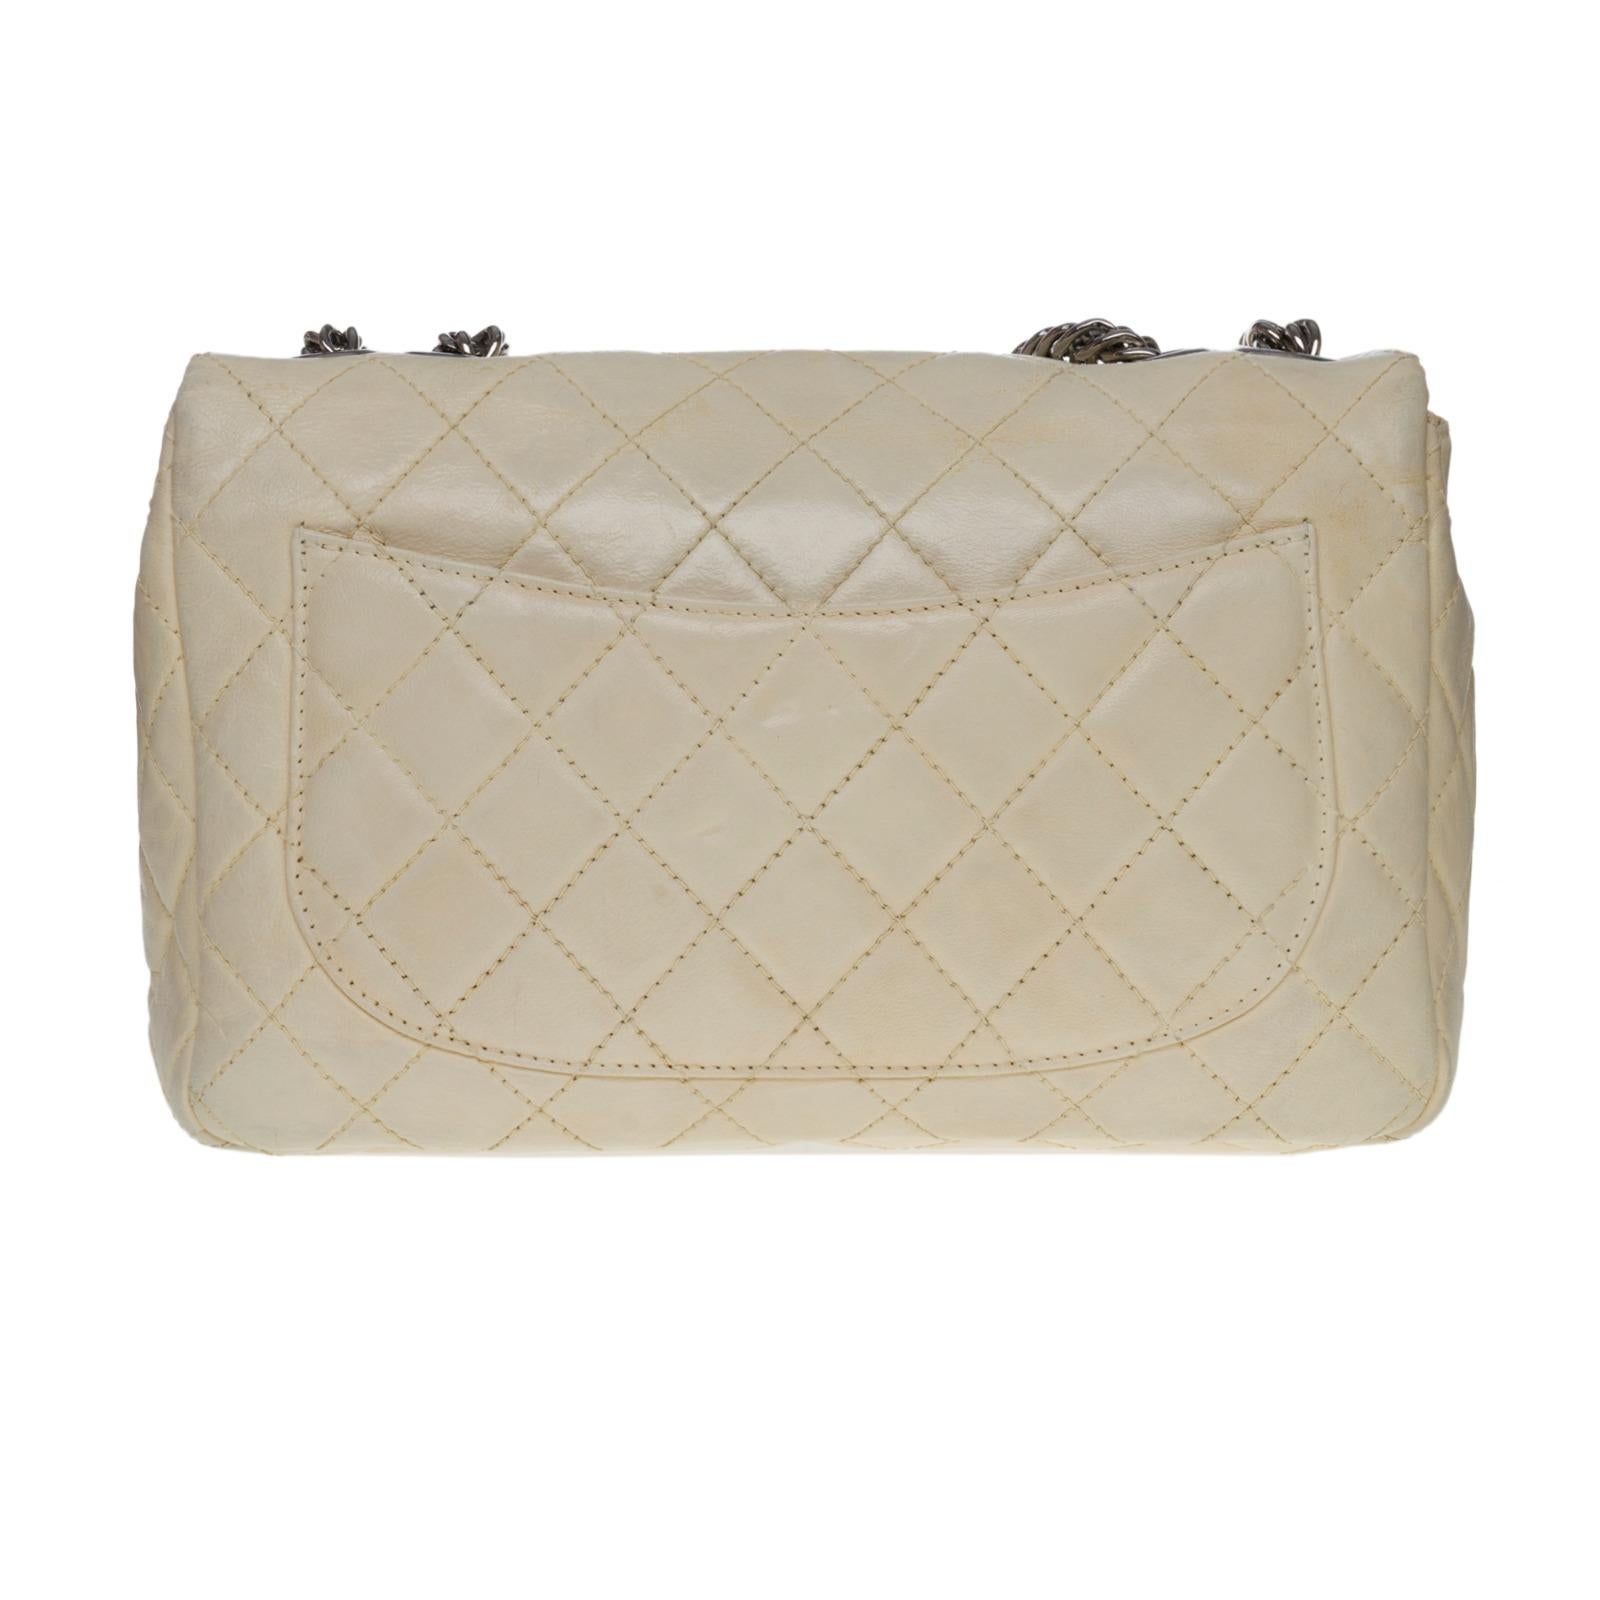 Chanel Timeless/Classique Jumbo Flap bag handbag in ecru quilted lambskin, SHW In Good Condition For Sale In Paris, IDF